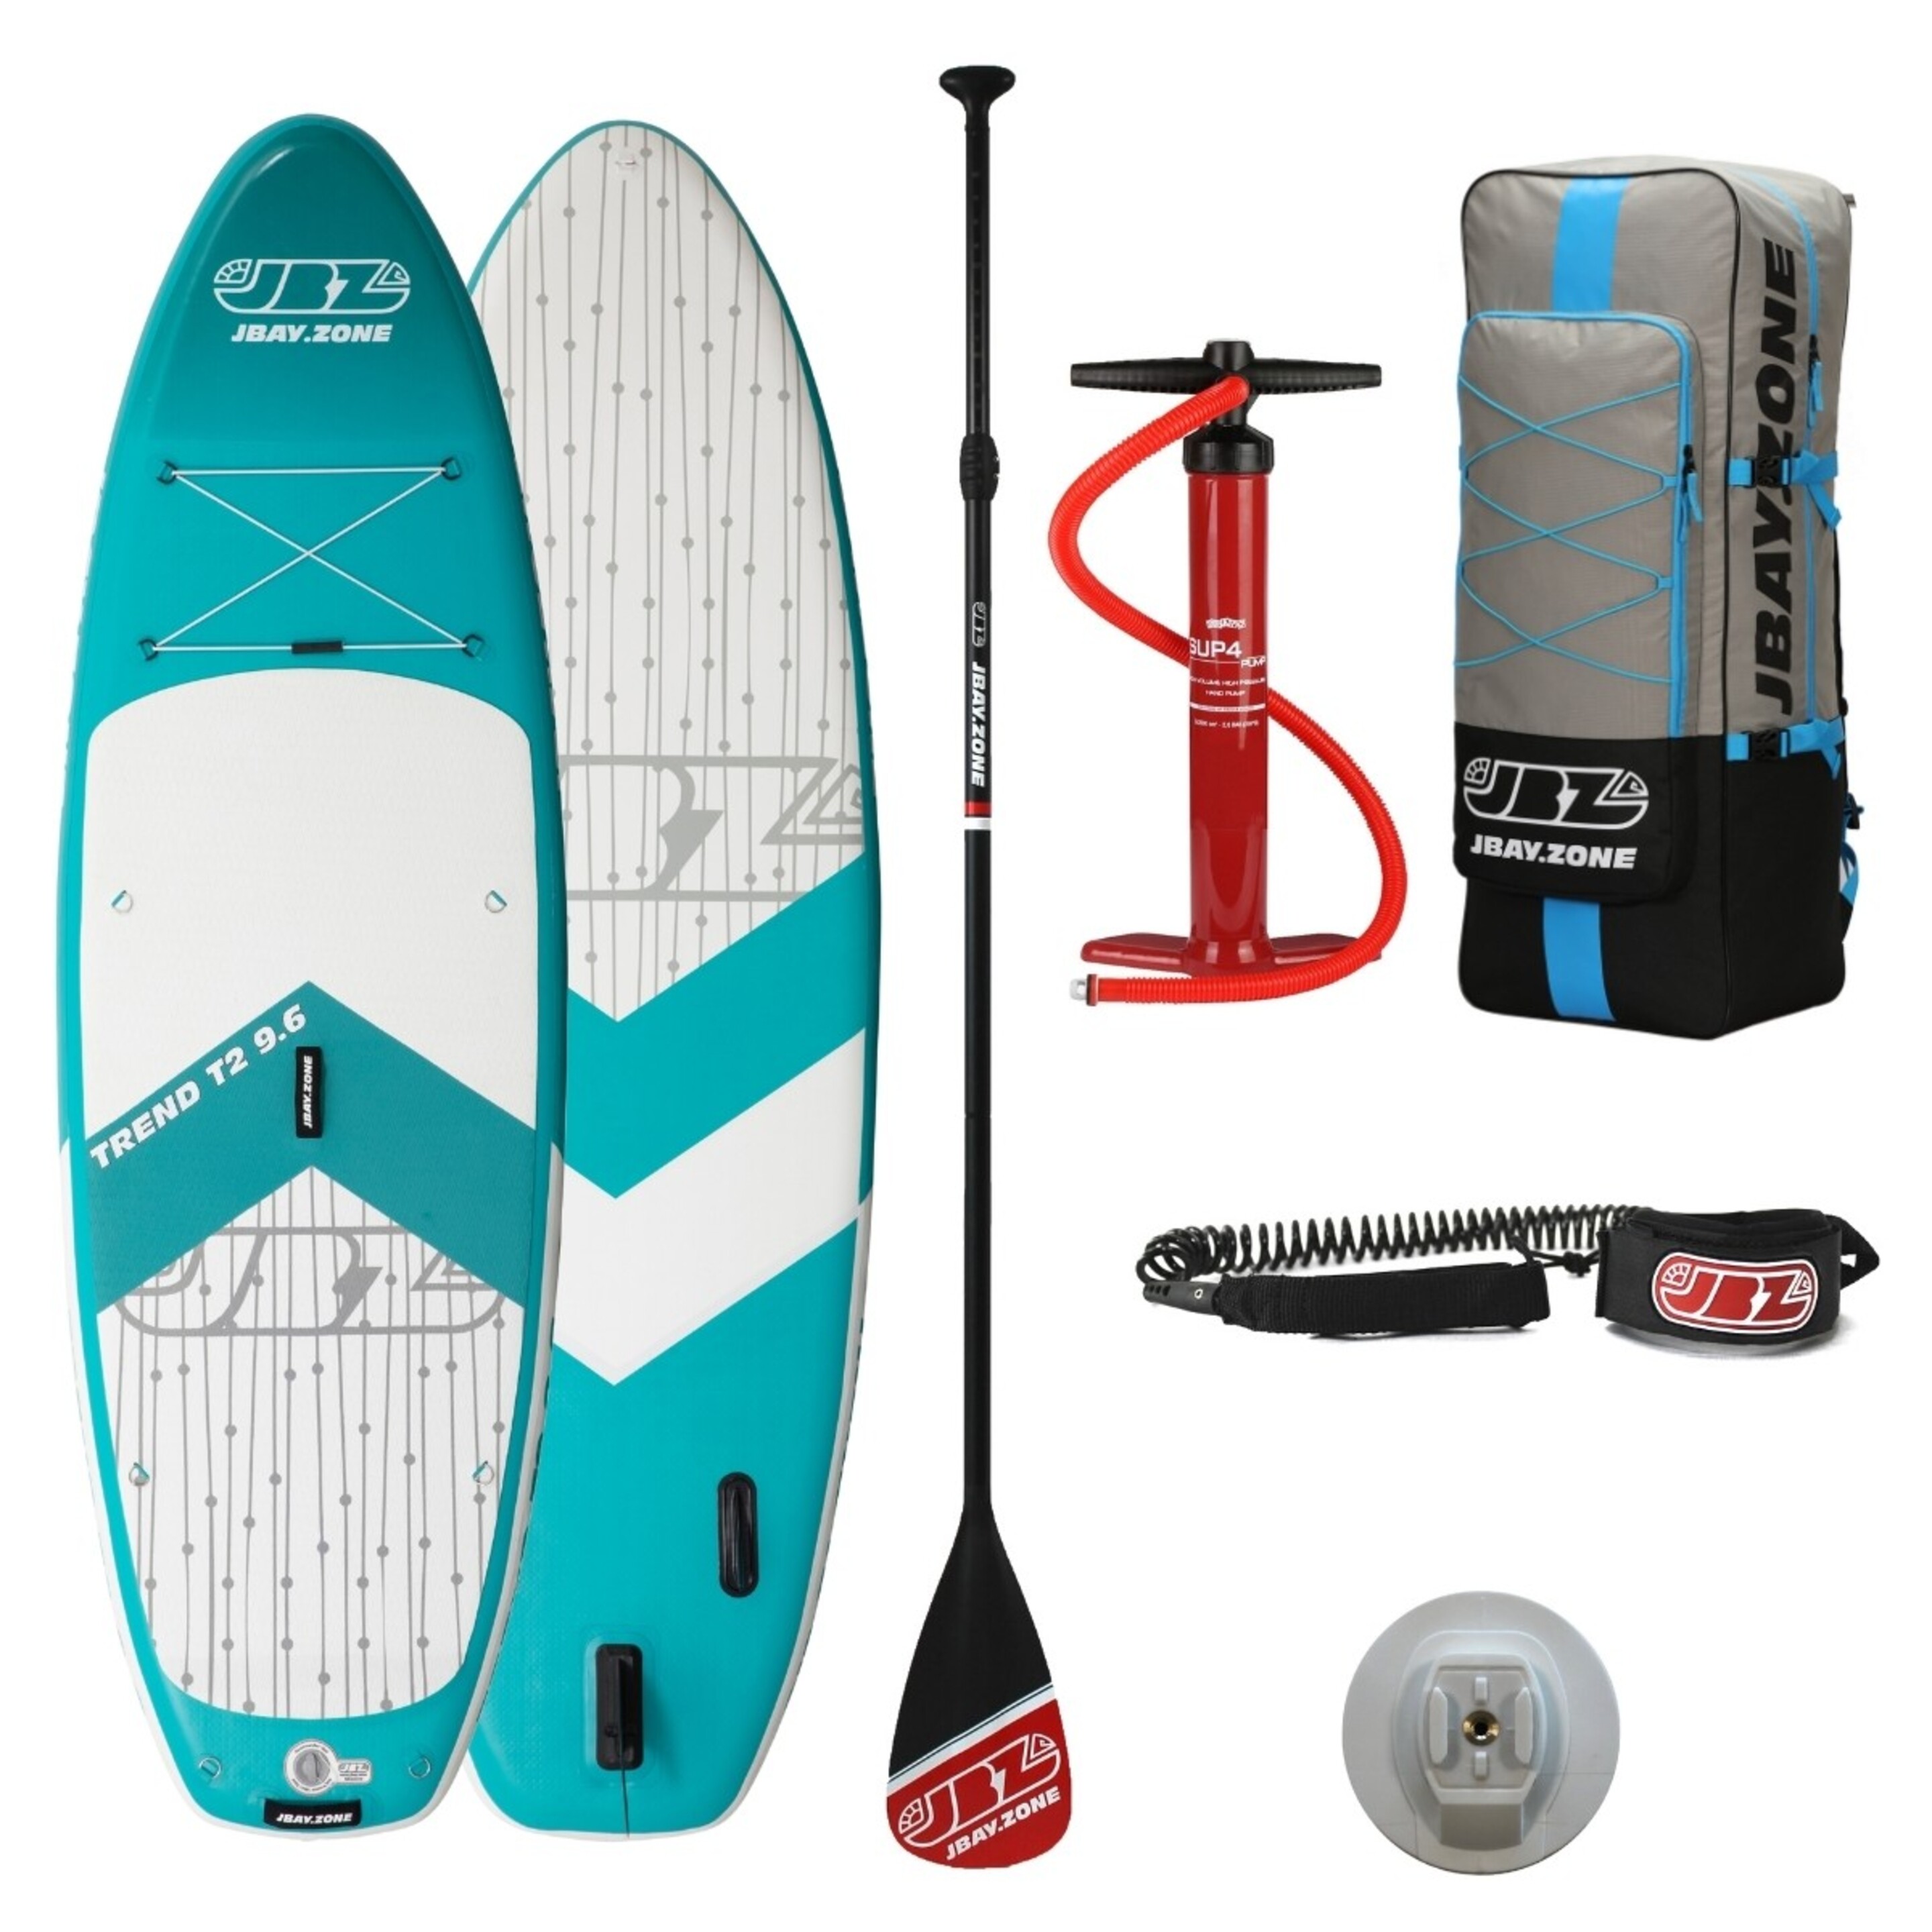 Tabla De Stand Up Paddle Surf Sup Hinchable Jbay.zone Modelo Trend T2